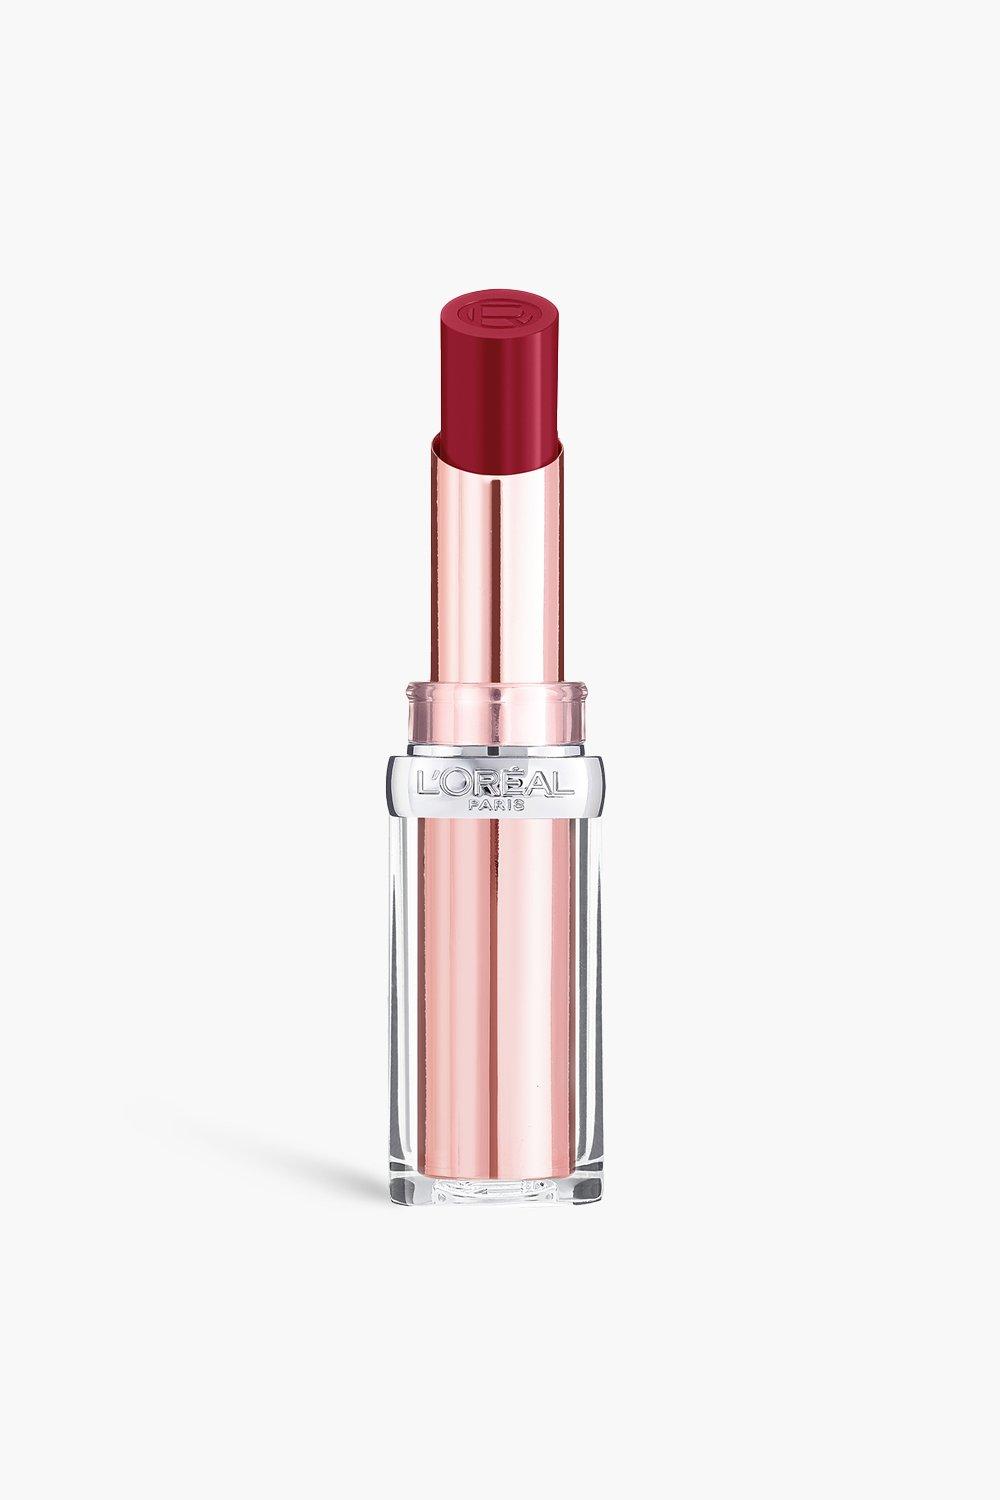 L'Oreal Paris Glow Paradise Natural-Looking Balm-In-Lipstick, Berry